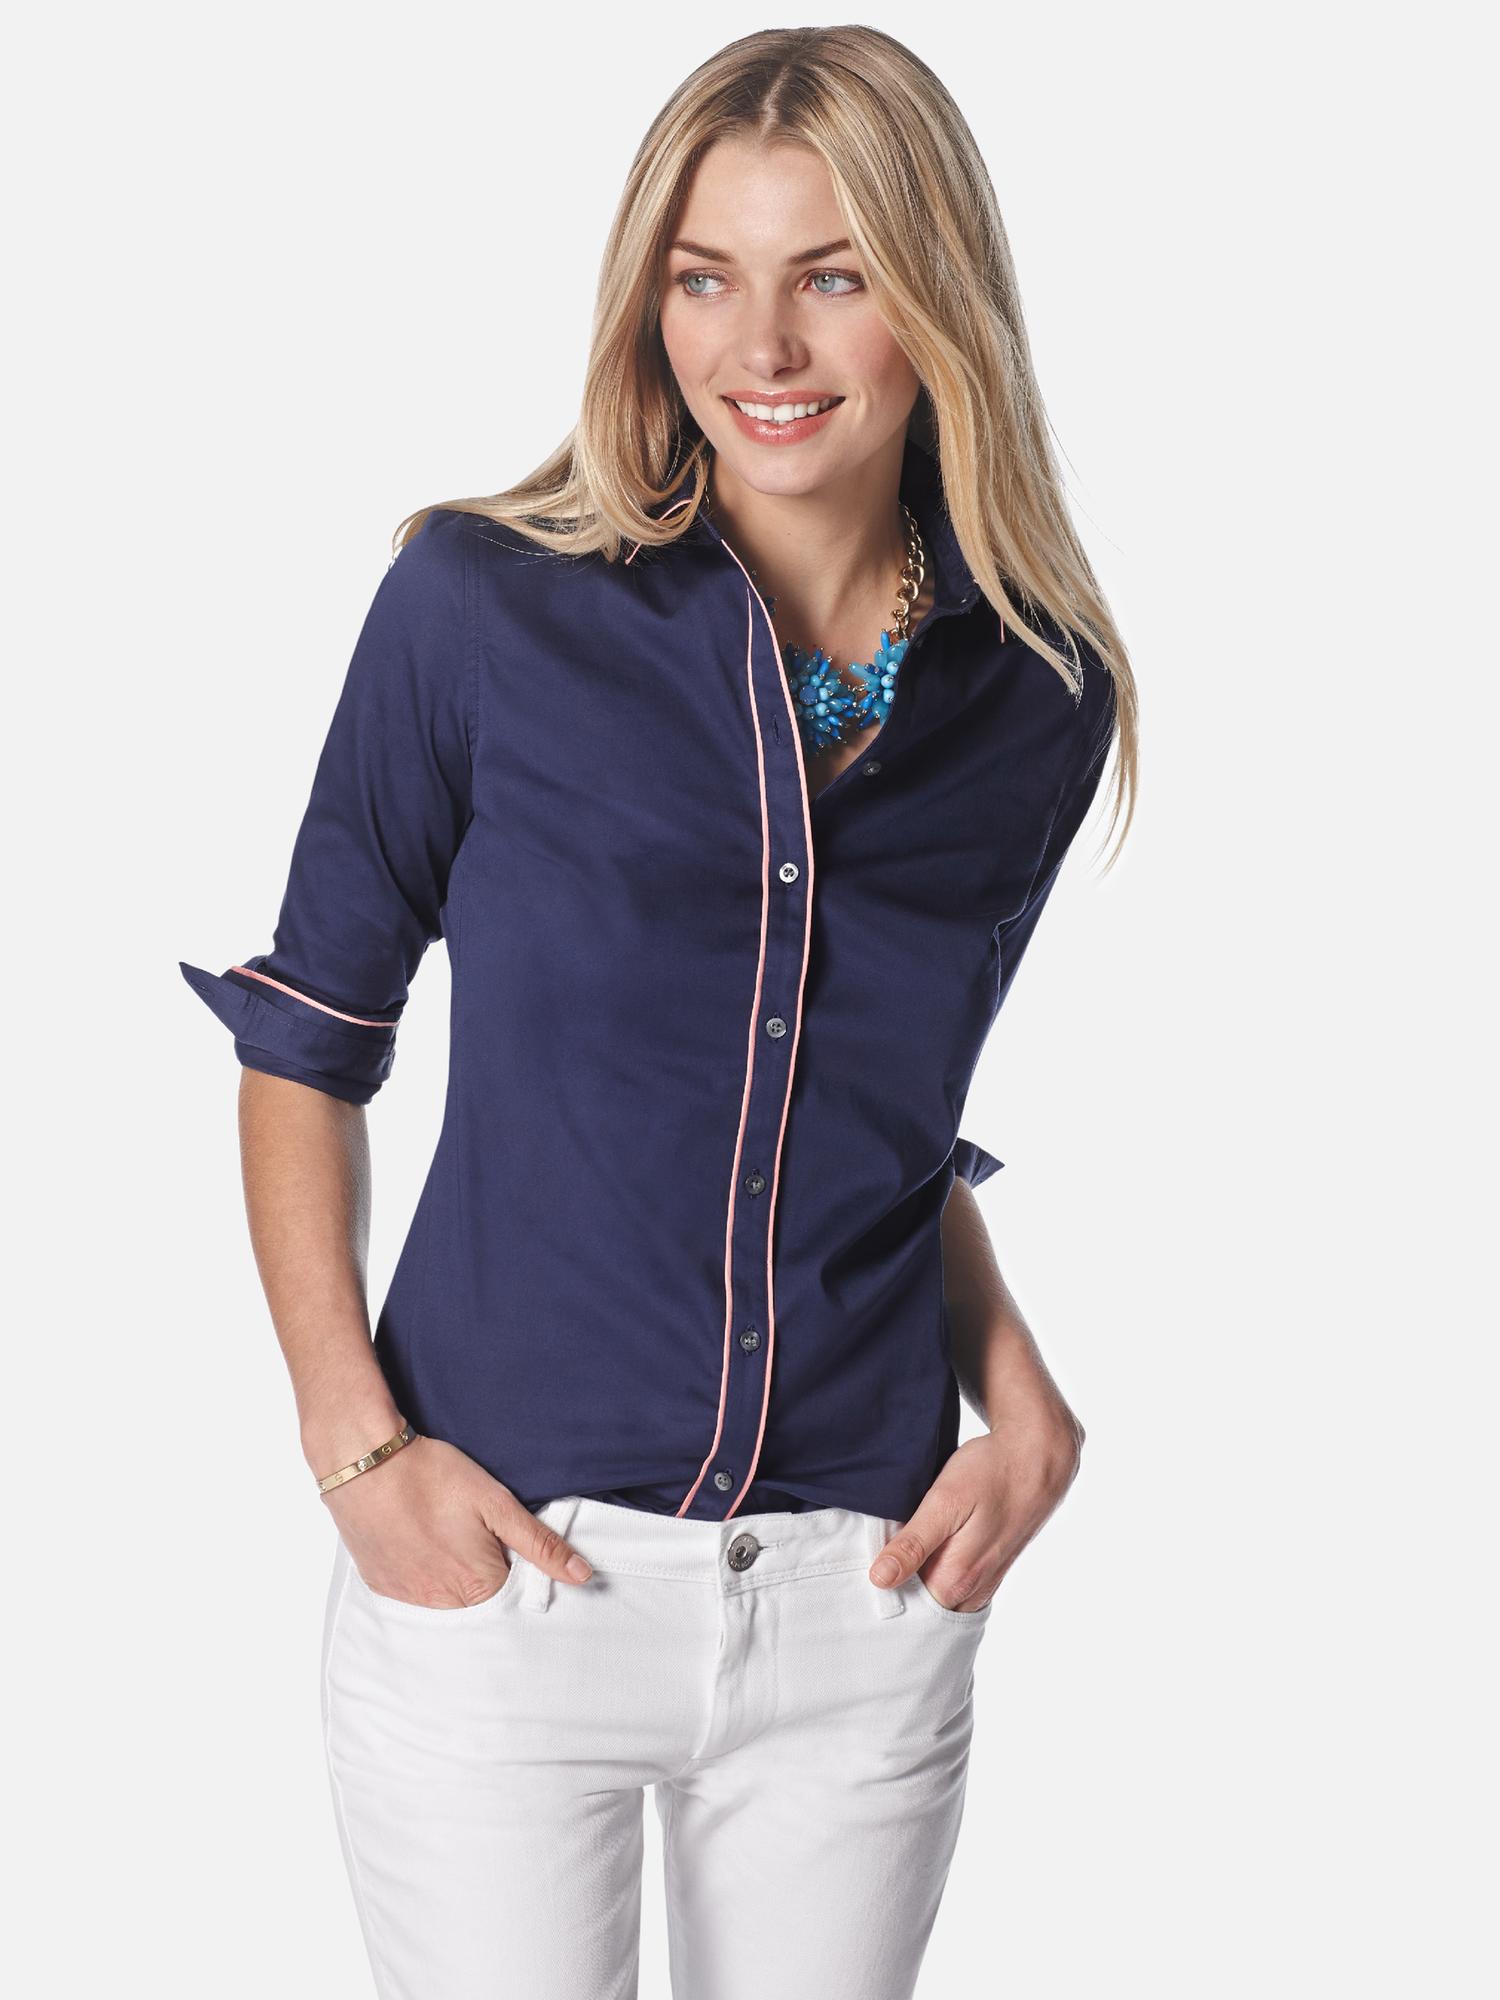 Milly Collection Piped Shirt | Banana Republic